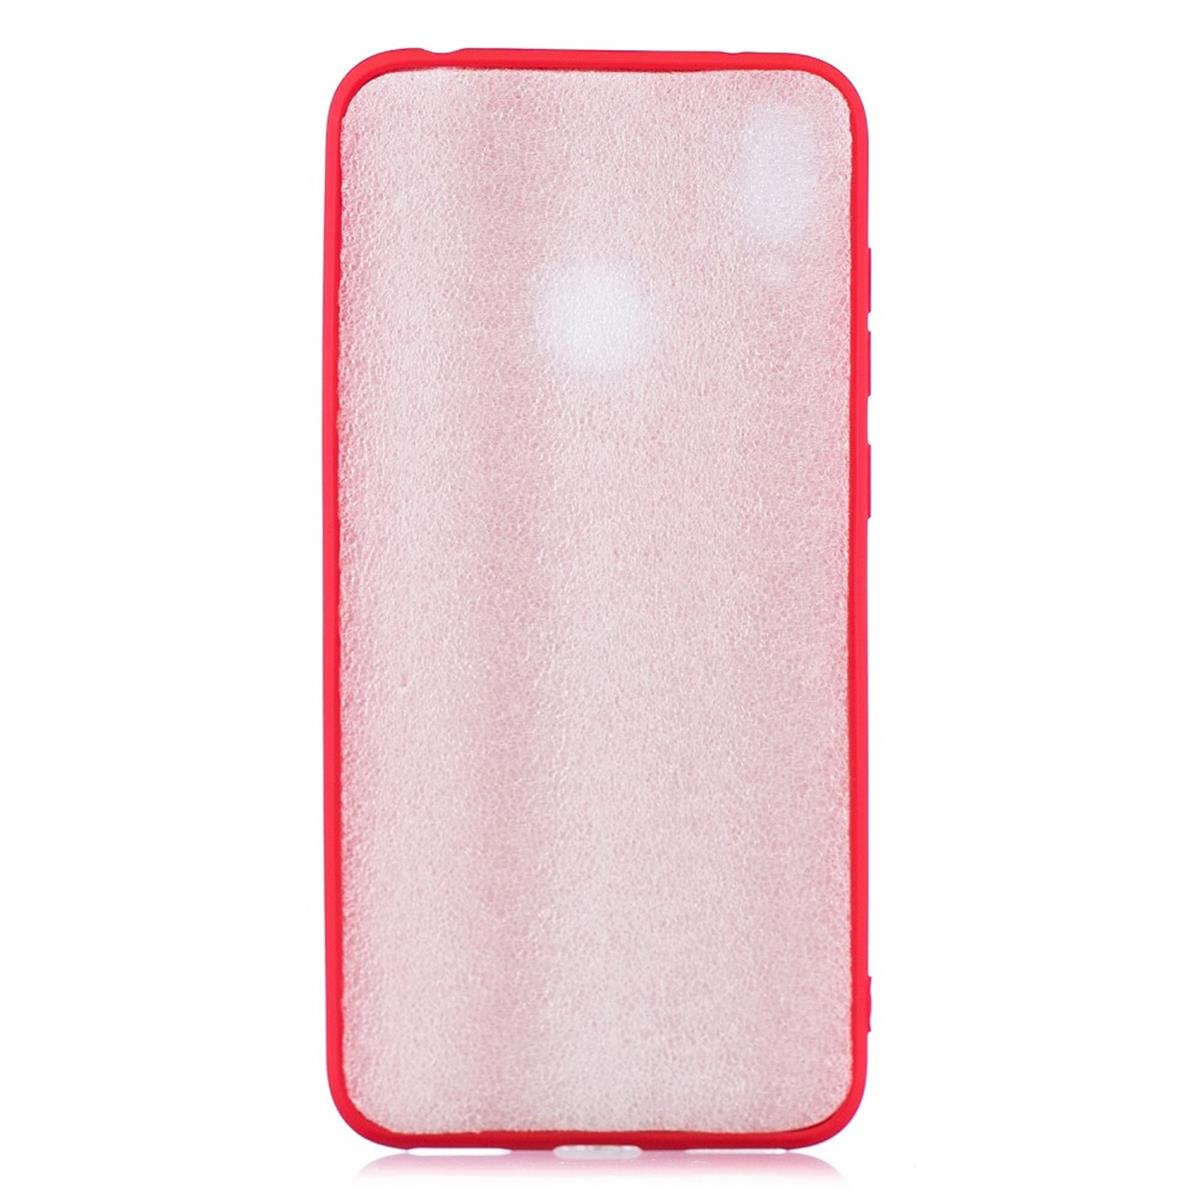 Handycase (2019), Huawei, Rot aus COVERKINGZ Y7 Backcover, Silikon,